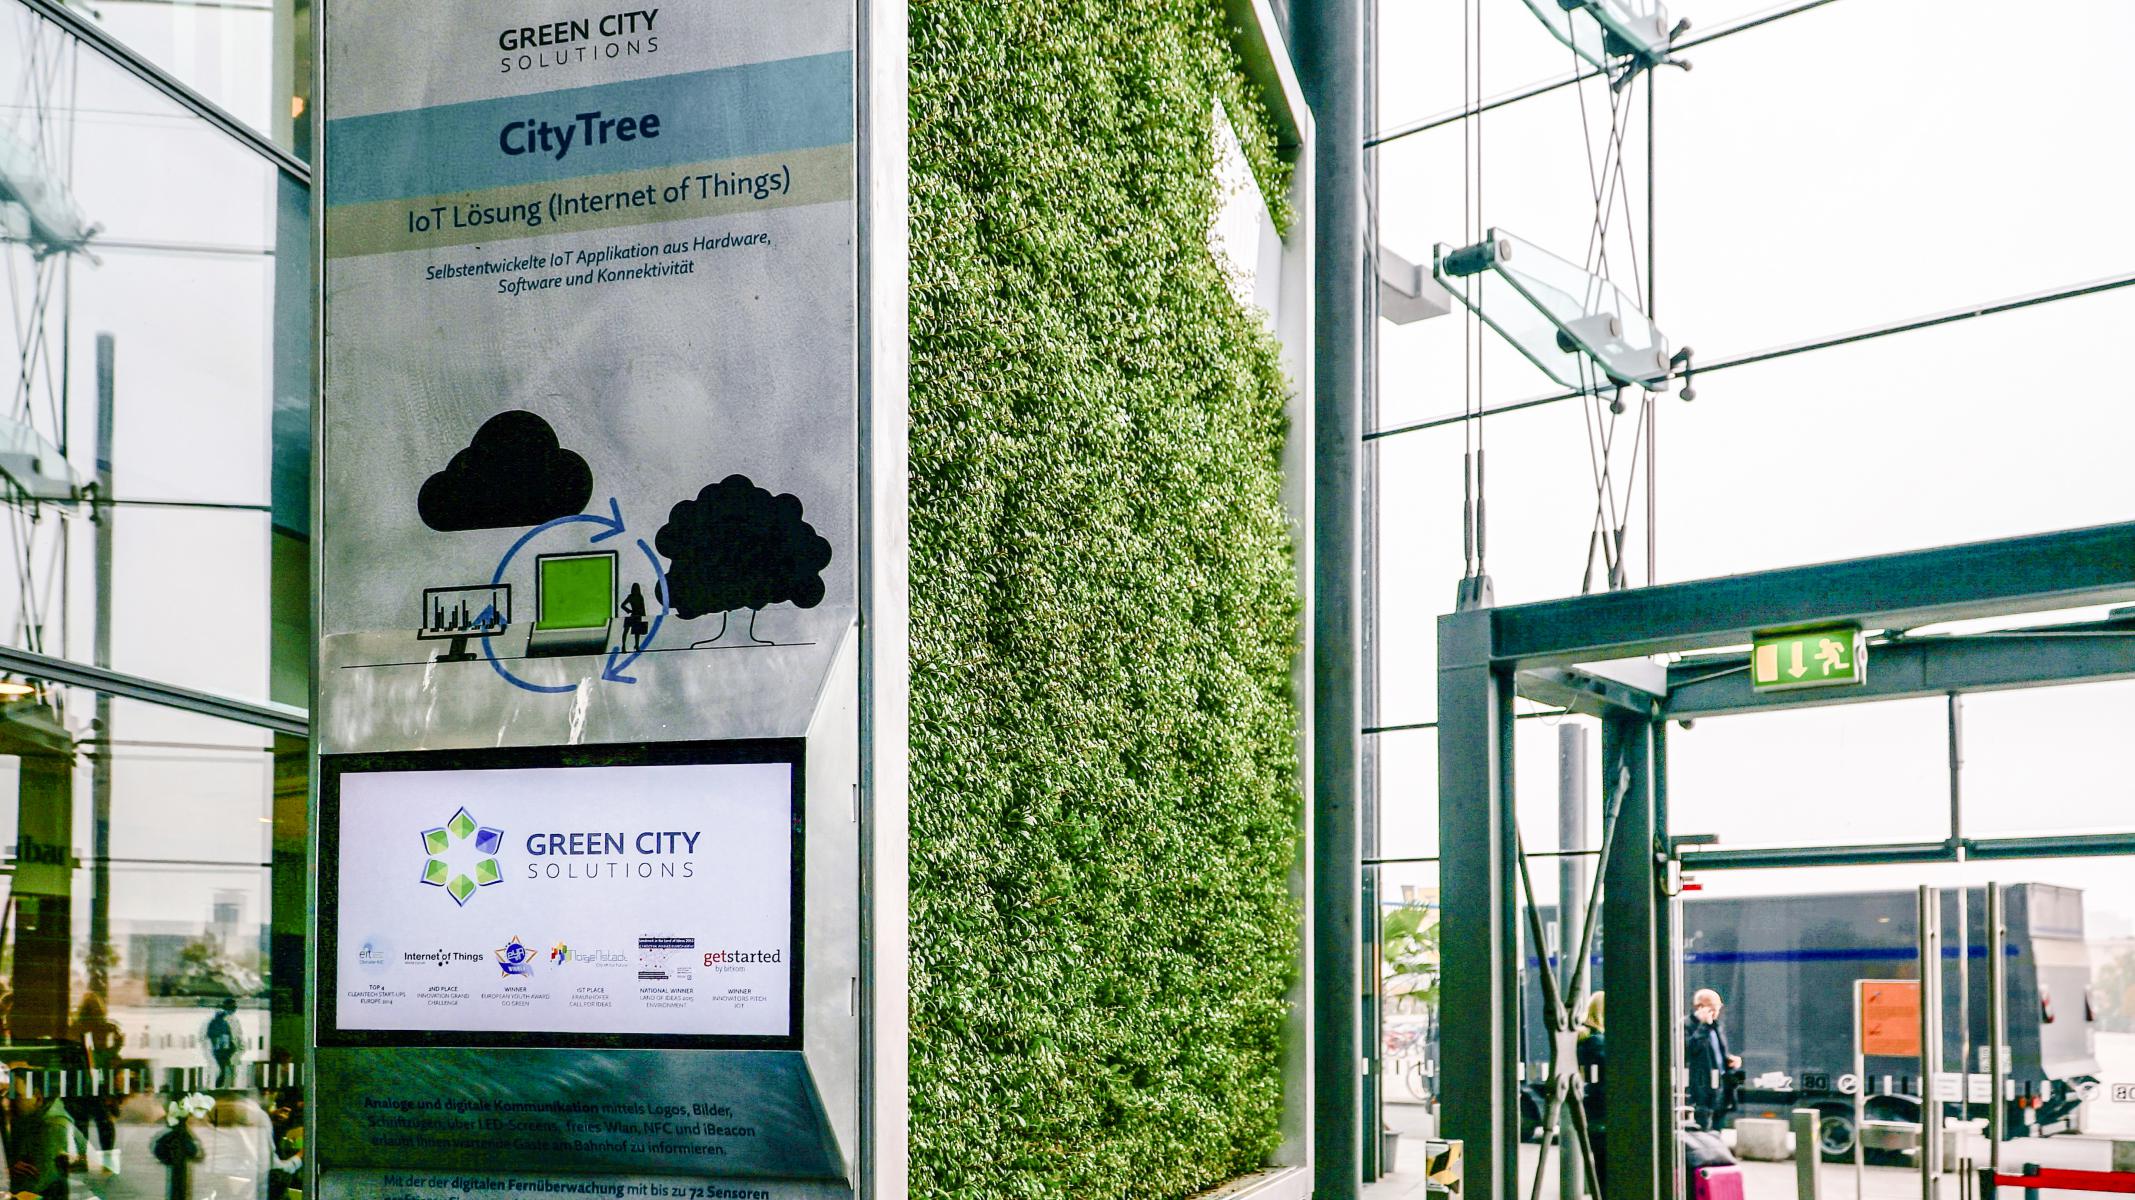 City solutions. Green City solutions. Стартап Green City solutions. Green City solutions проекты. Green City мешки.